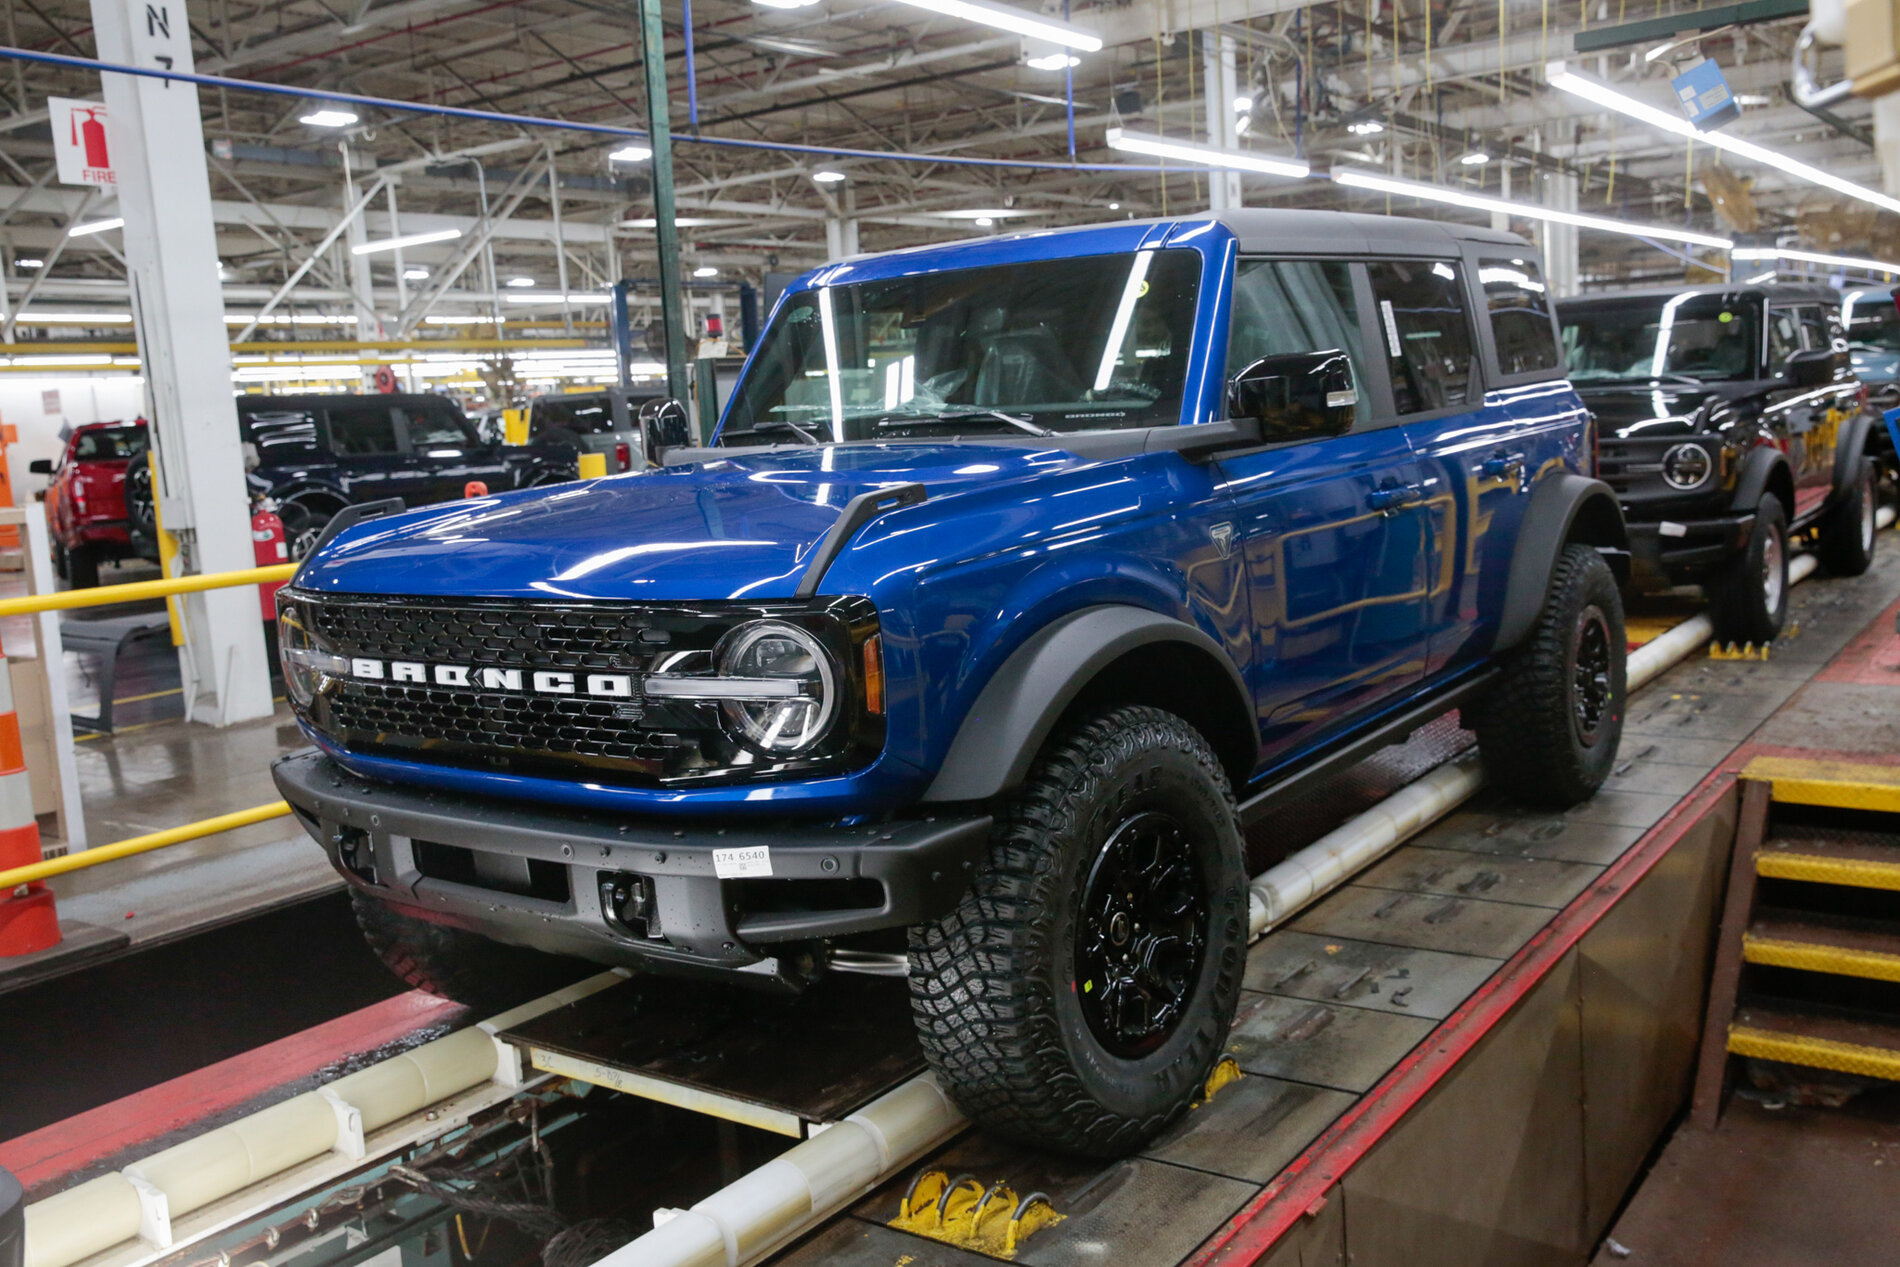 Post Your Bronco Production Line Pics! (From Ford Emails Starting Today)   Bronco6G - 2021+ Ford Bronco & Bronco Raptor Forum, News, Blog & Owners  Community